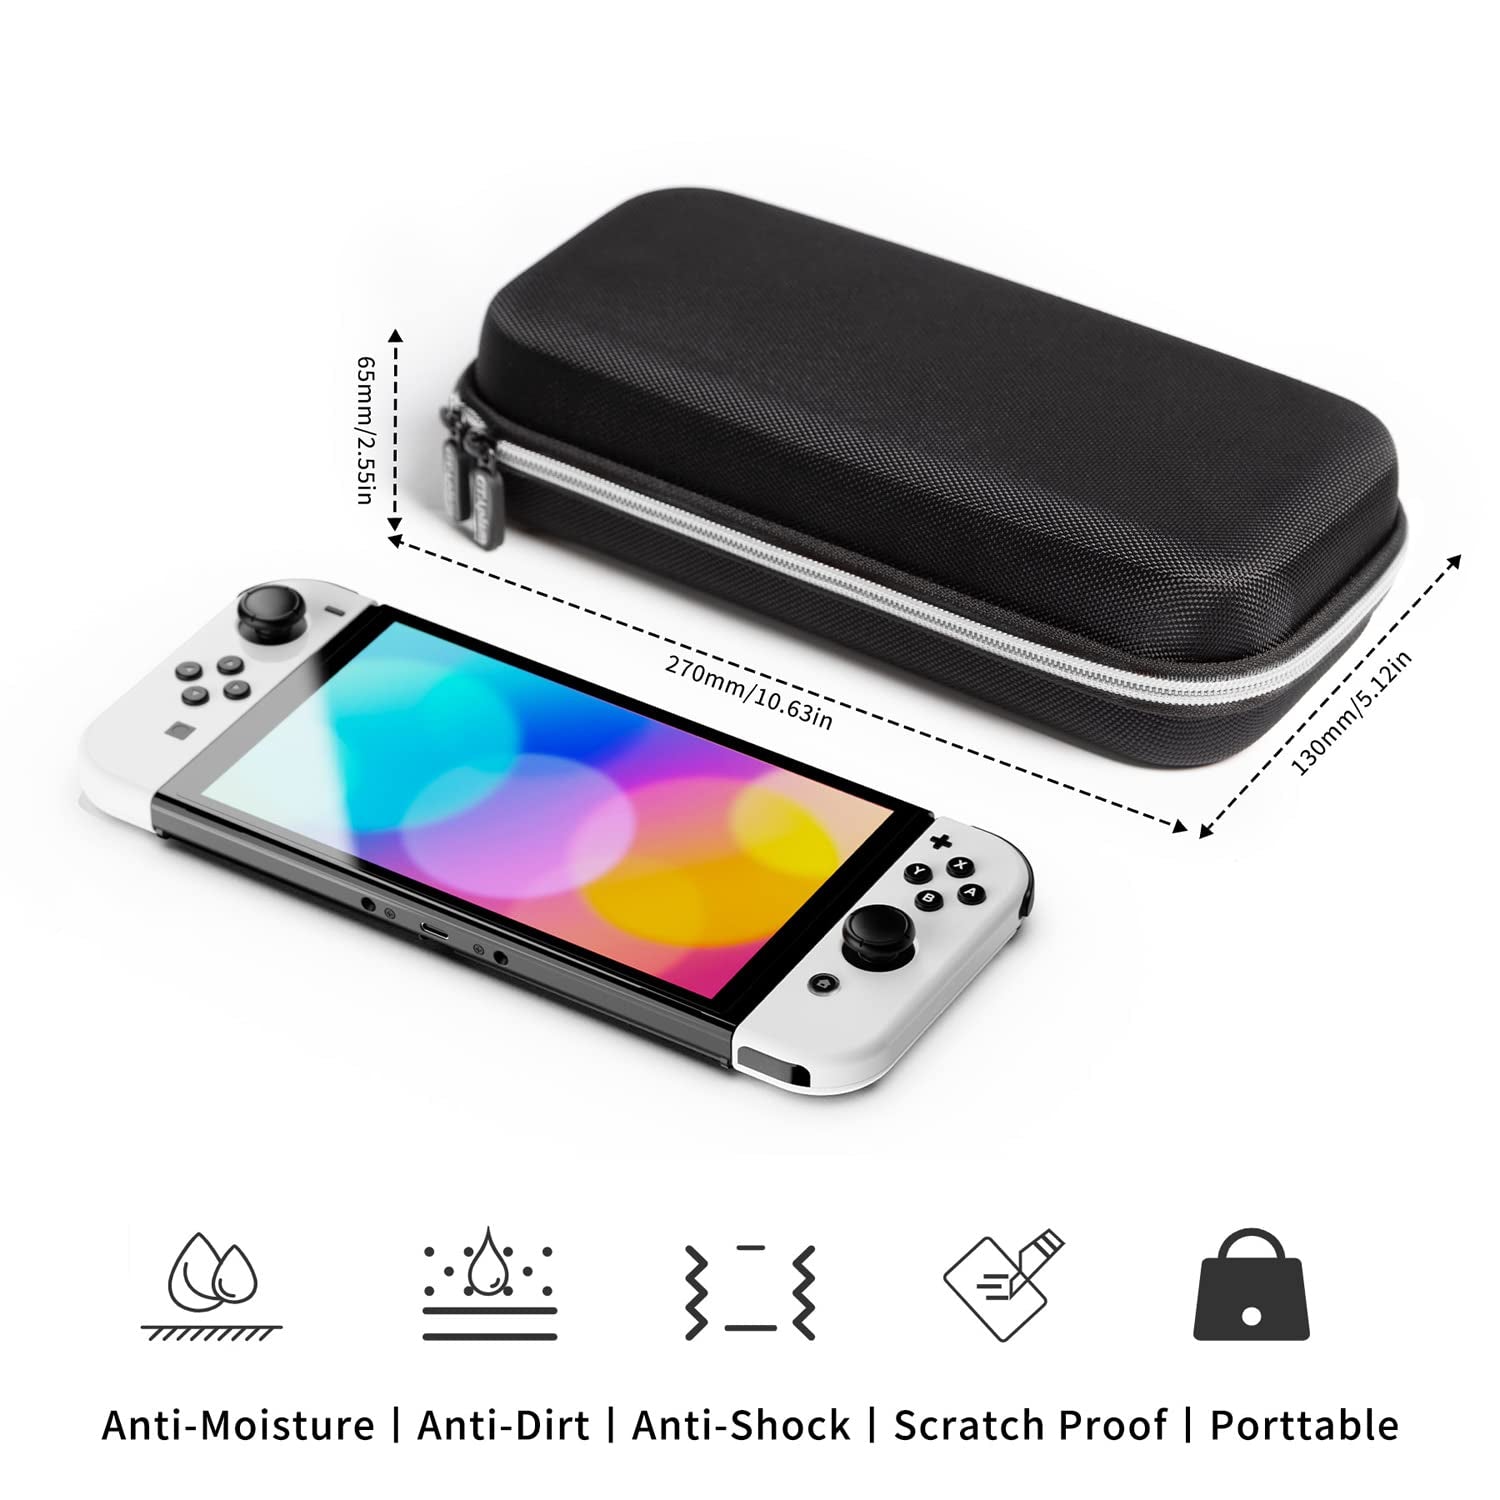 14-in-1 Accessories Kit for Nintendo Switch OLED Model 202, Includes Case, Clear Cover, Screen Protector, Silicone Joy-Con Skin, Thumb Grip Caps, USB Cable and More